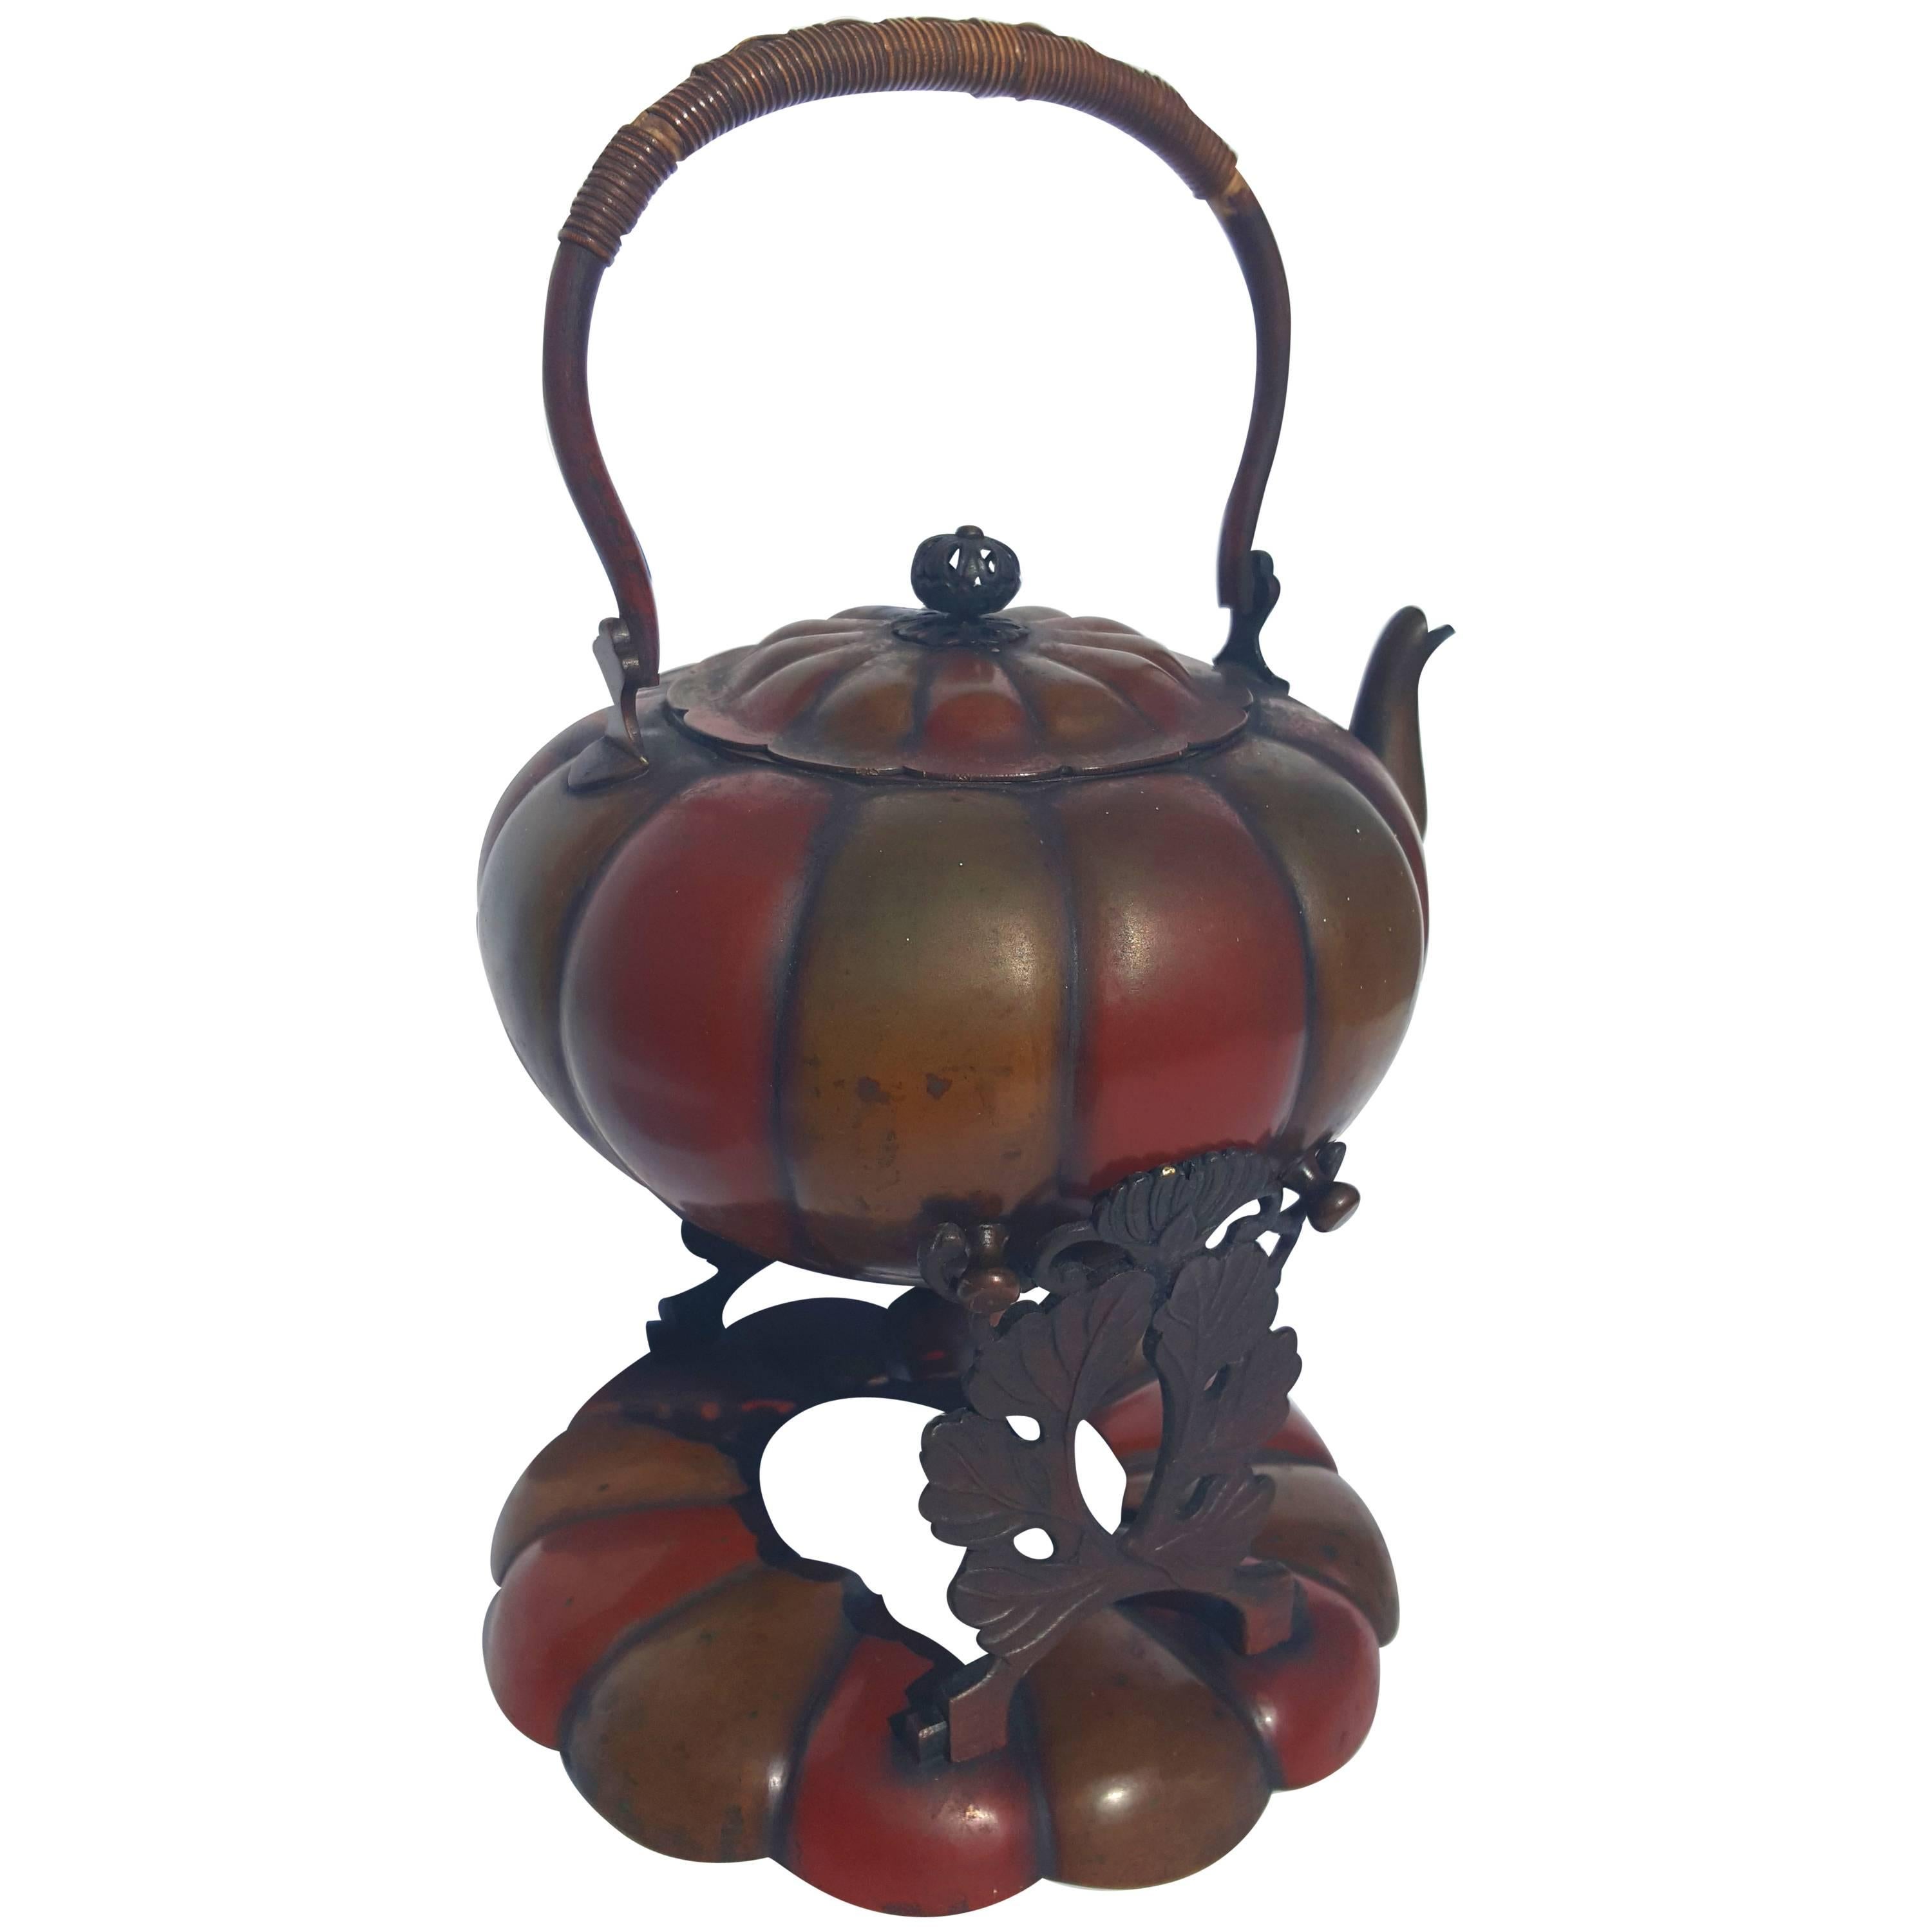 Chinese Tea Kettle and Pedestal